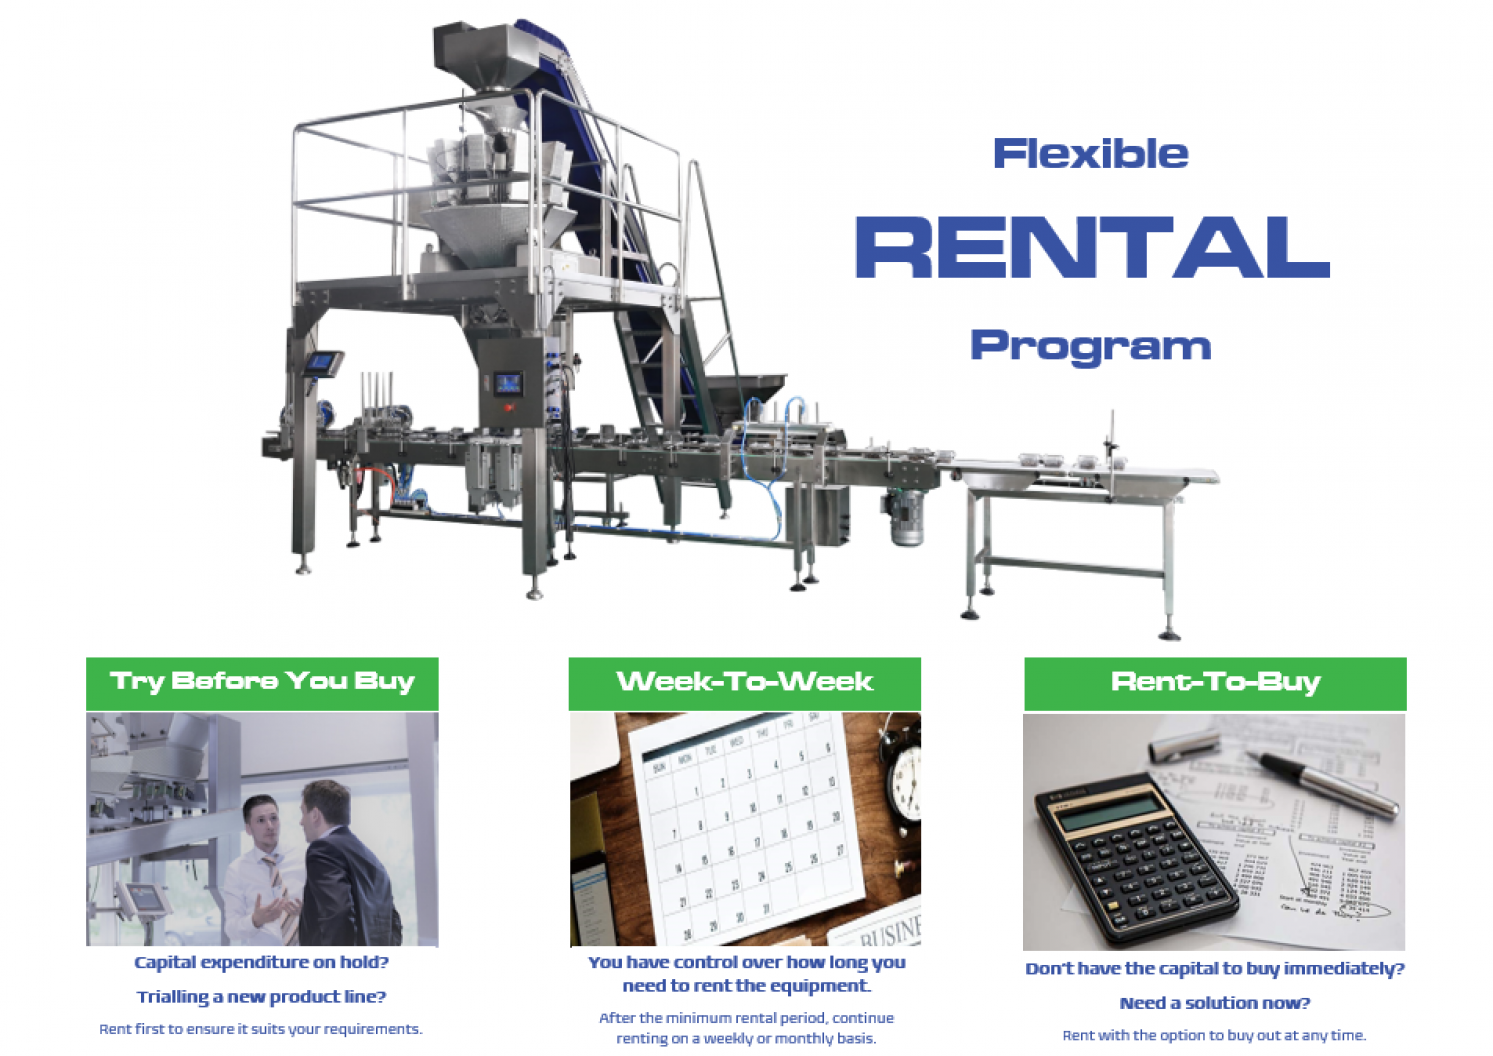 Proquip Solutions Flexible Rental Program for Process and Packaging Equipment